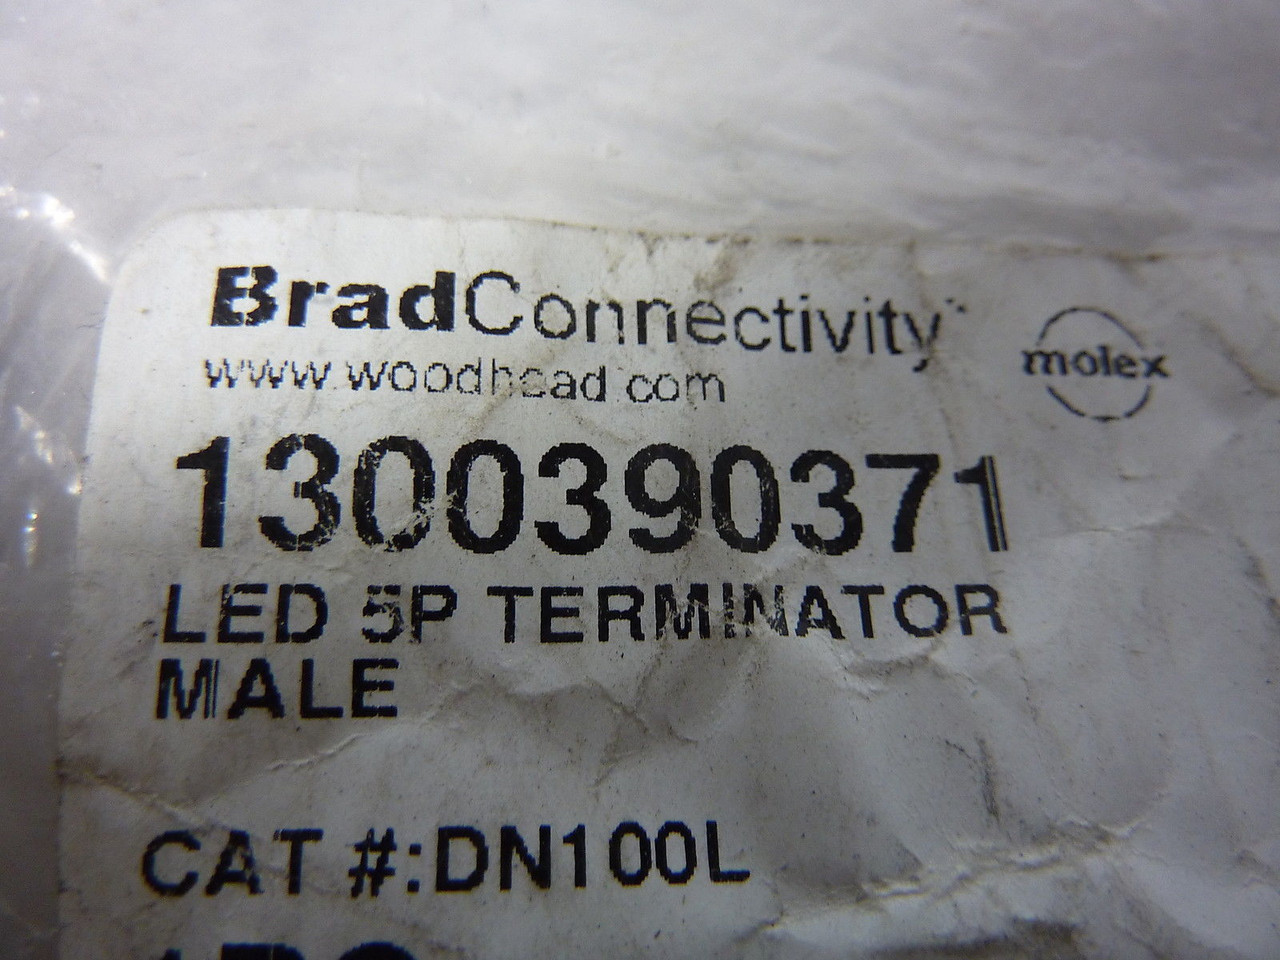 Brad Connectivity 1300390371 LED Connector Terminator  Male 5 Pin ! NEW !